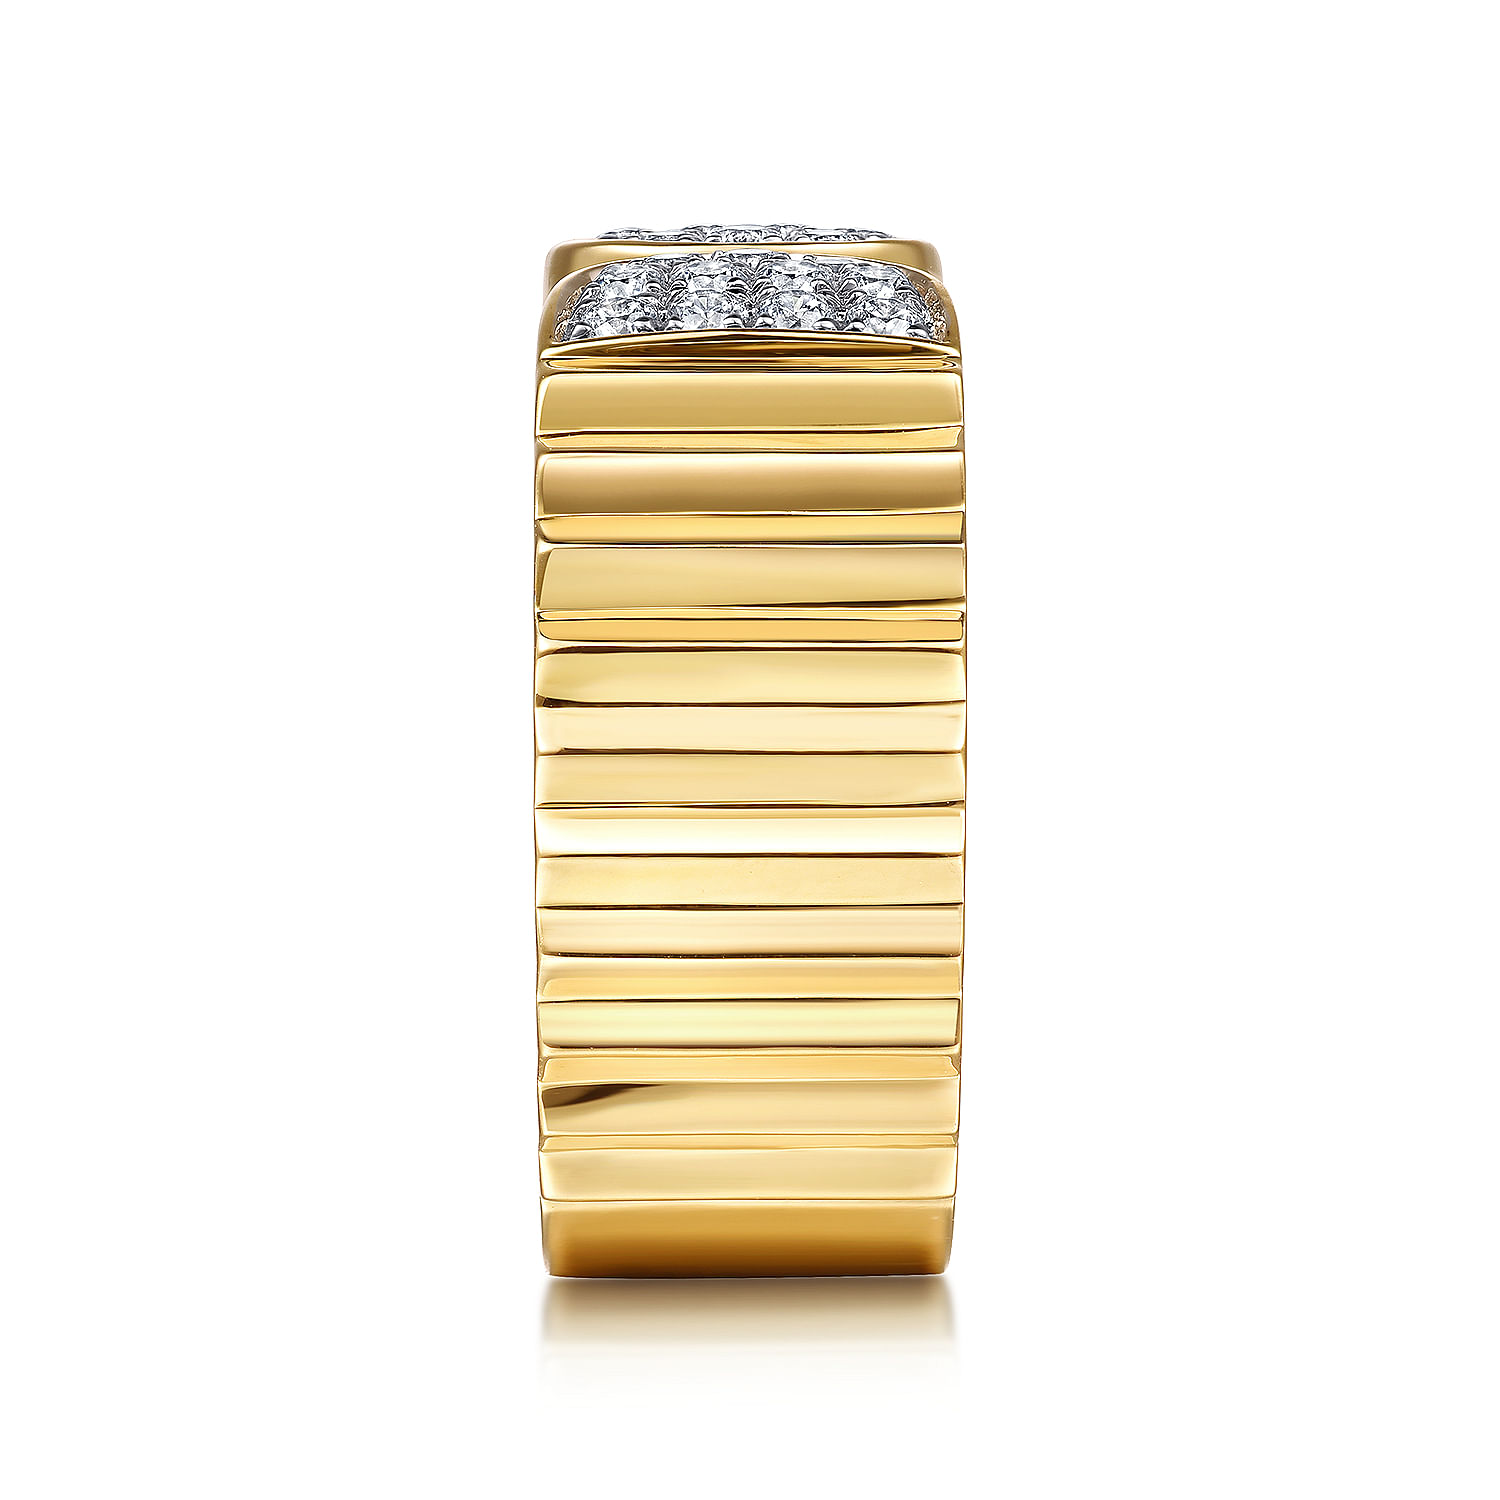 Diamond Cut - 14K Yellow Gold Open Ring with Diamond Pave End Caps and Diamond Cut Texture - 0.3 ct - Shot 4